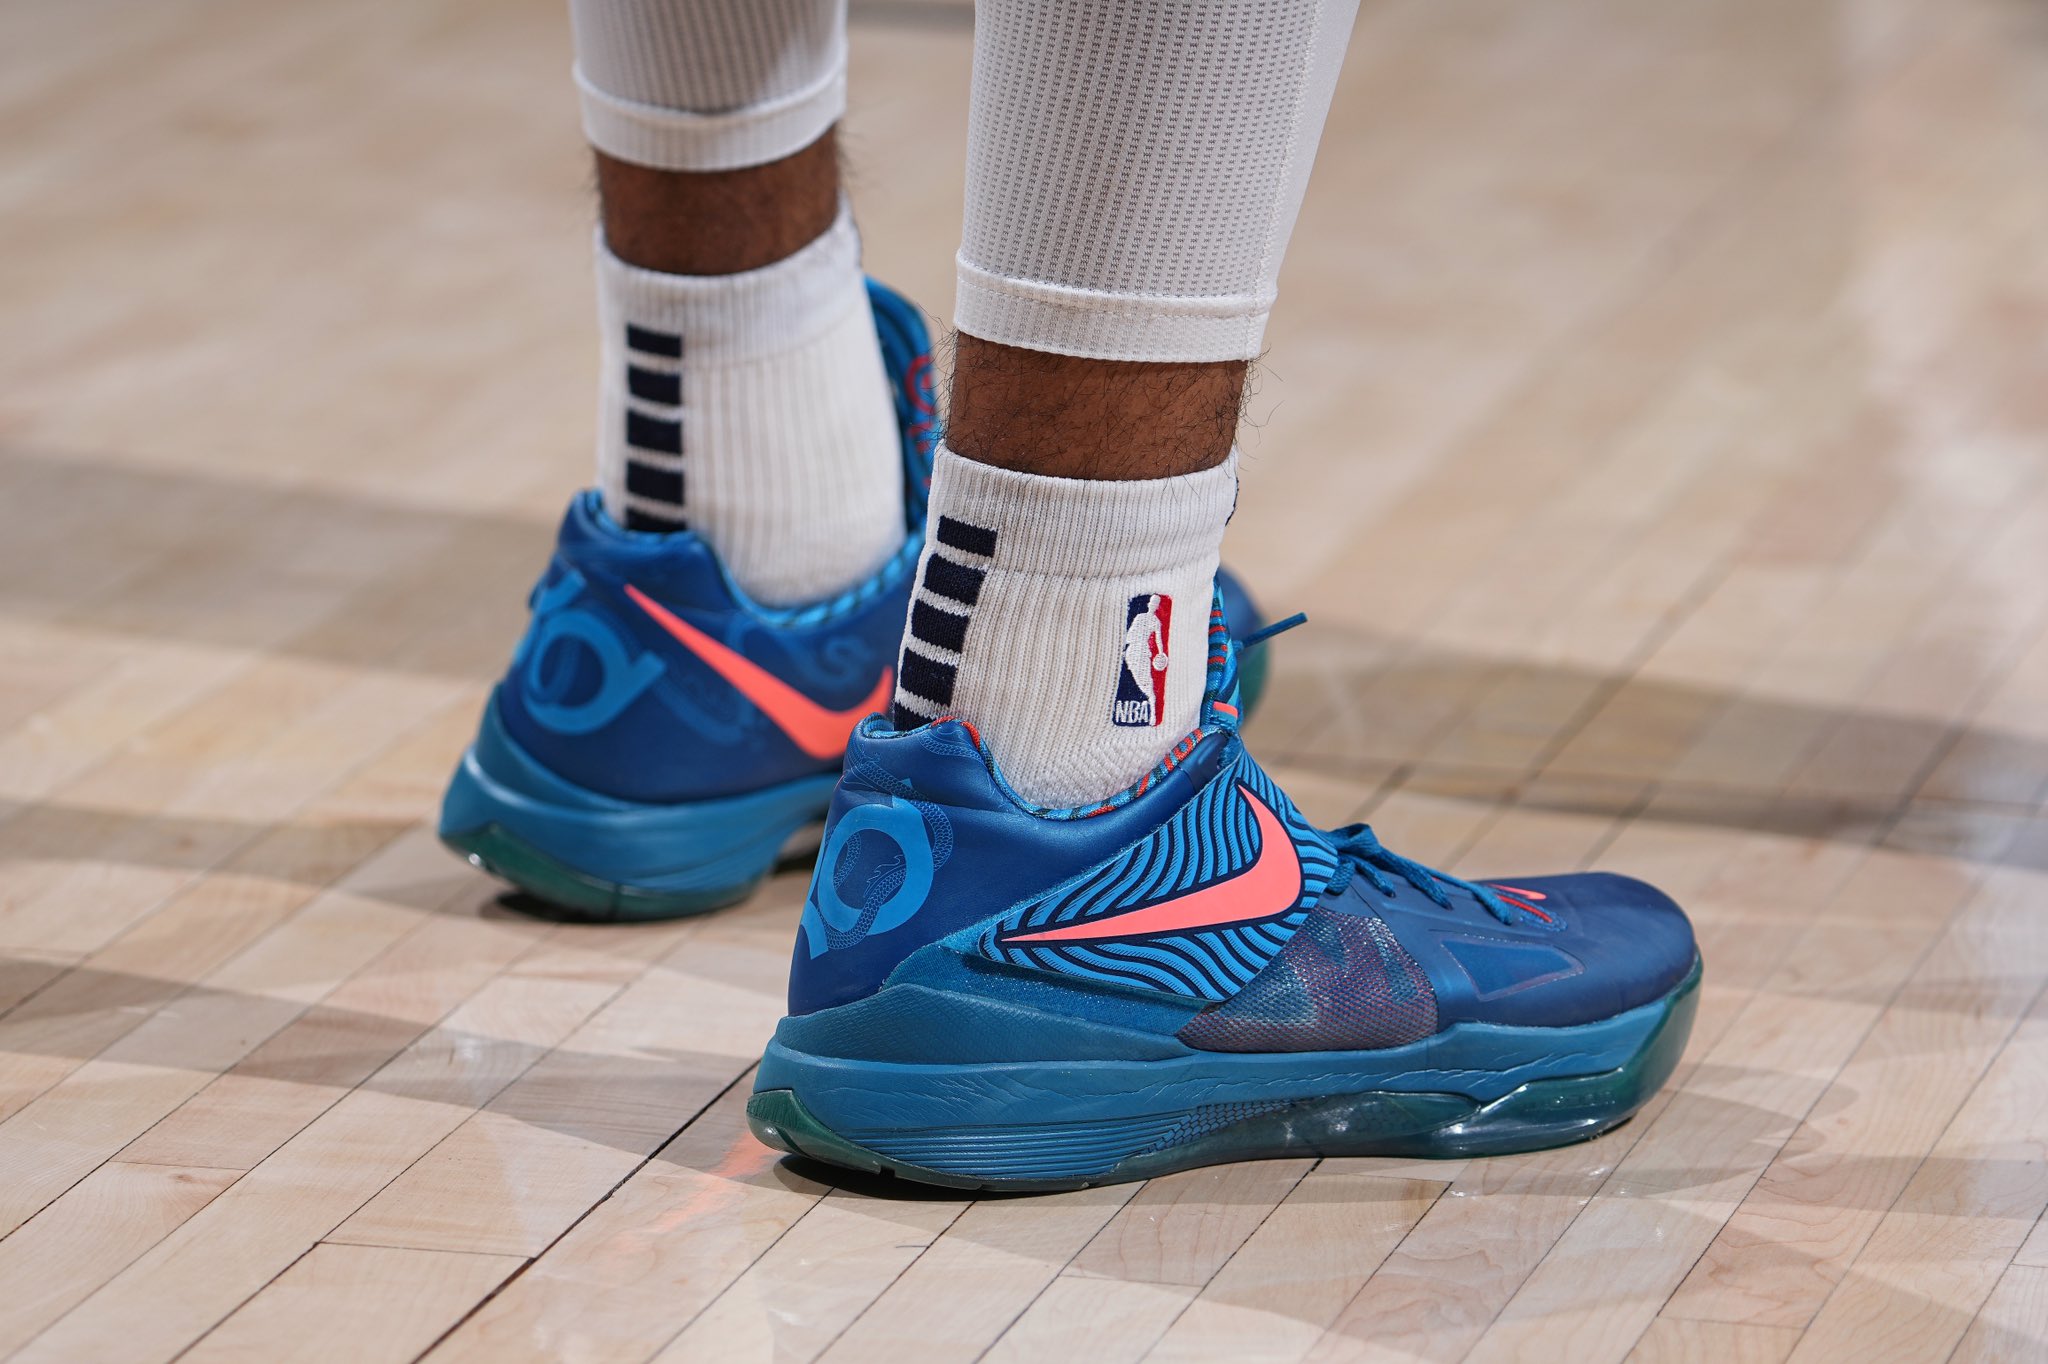 Si herramienta Orden alfabetico B/R Kicks on Twitter: "A closer look at @JaMorant wearing the Nike KD 4 “ Year of the Dragon” https://t.co/v0wgKO3G8d" / Twitter